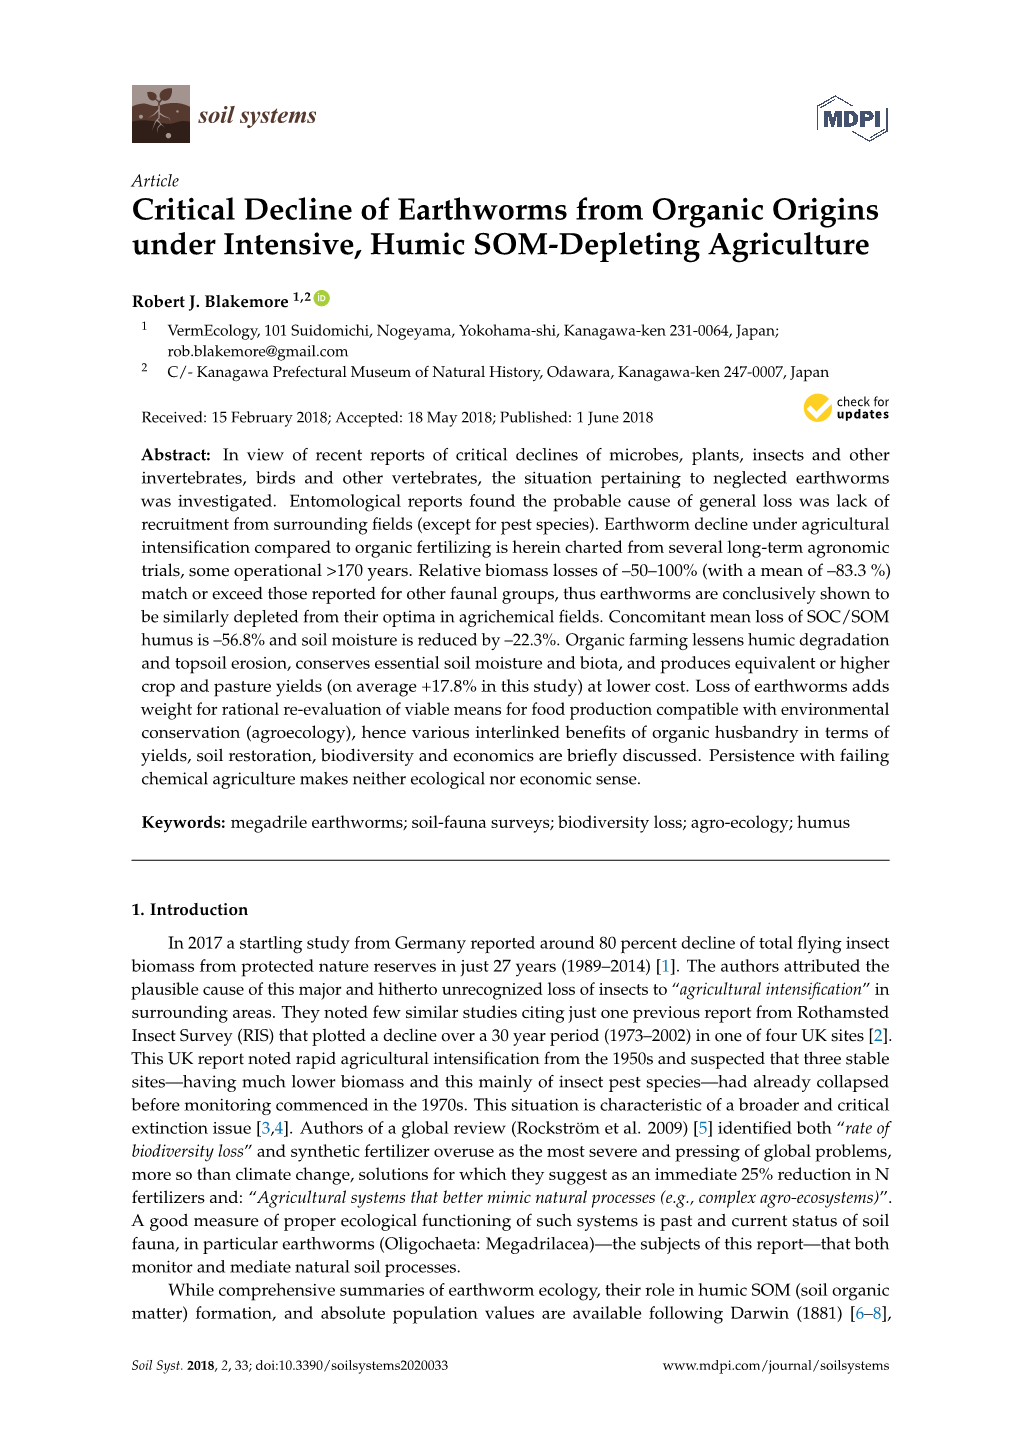 Critical Decline of Earthworms from Organic Origins Under Intensive, Humic SOM-Depleting Agriculture